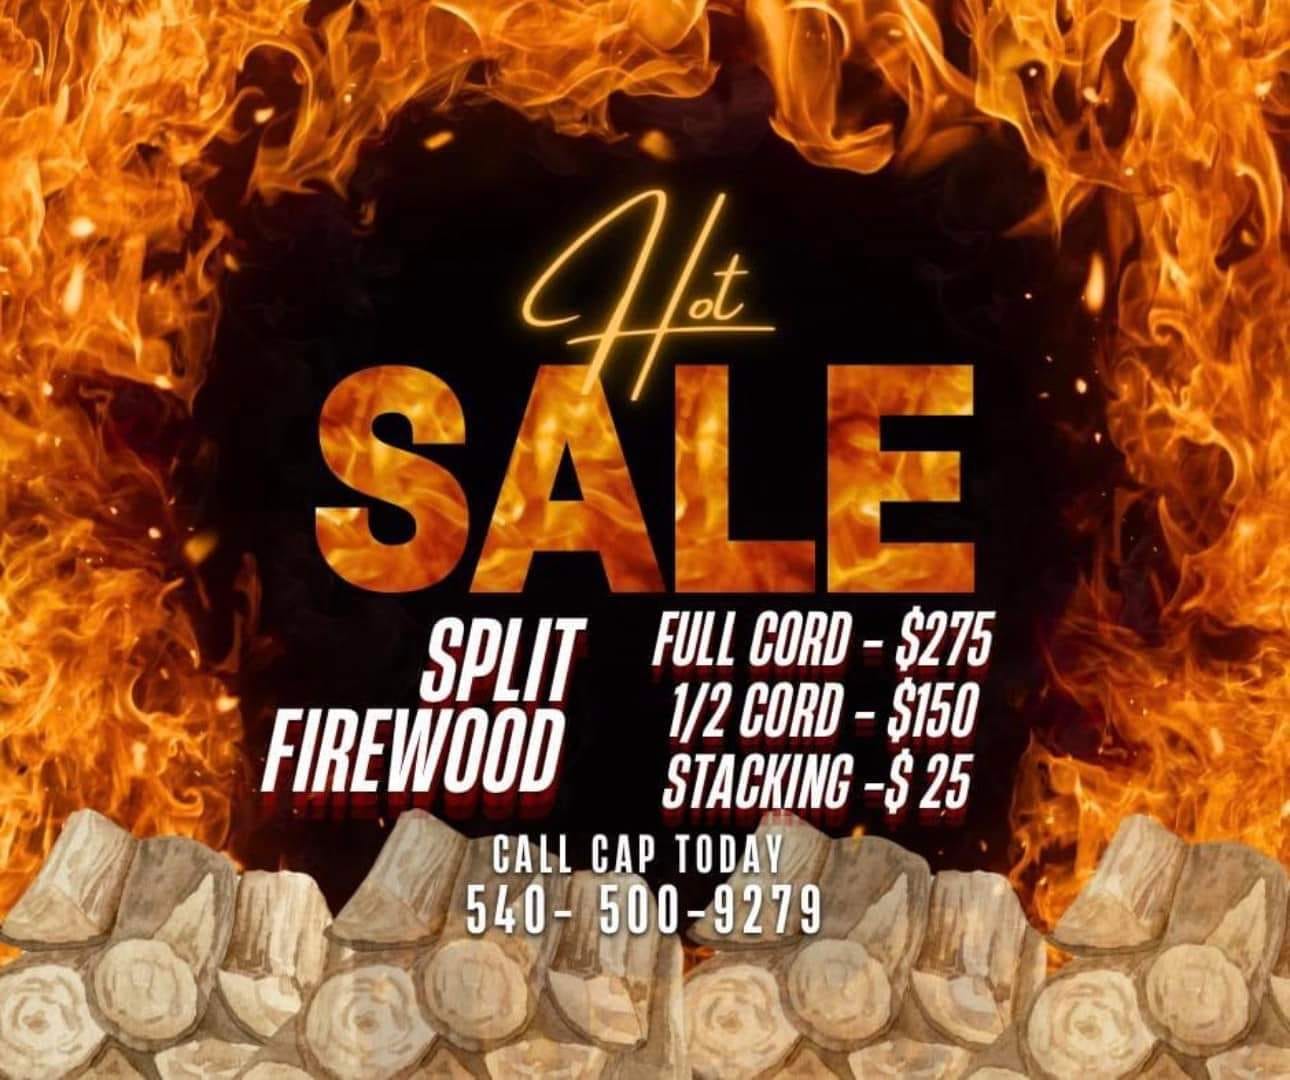 SPLIT & SEASONED FIREWOOD 🪓🪵🔥
FULL CORD: $275
1/2 CORD: $150
Stacking: $25
CALL AND/OR MESSAGE CAP AT Pressure & Soft Washing w/ CAP 
CALL, TEXT, OR MESSAGE  CAP 540-500-9279 📞